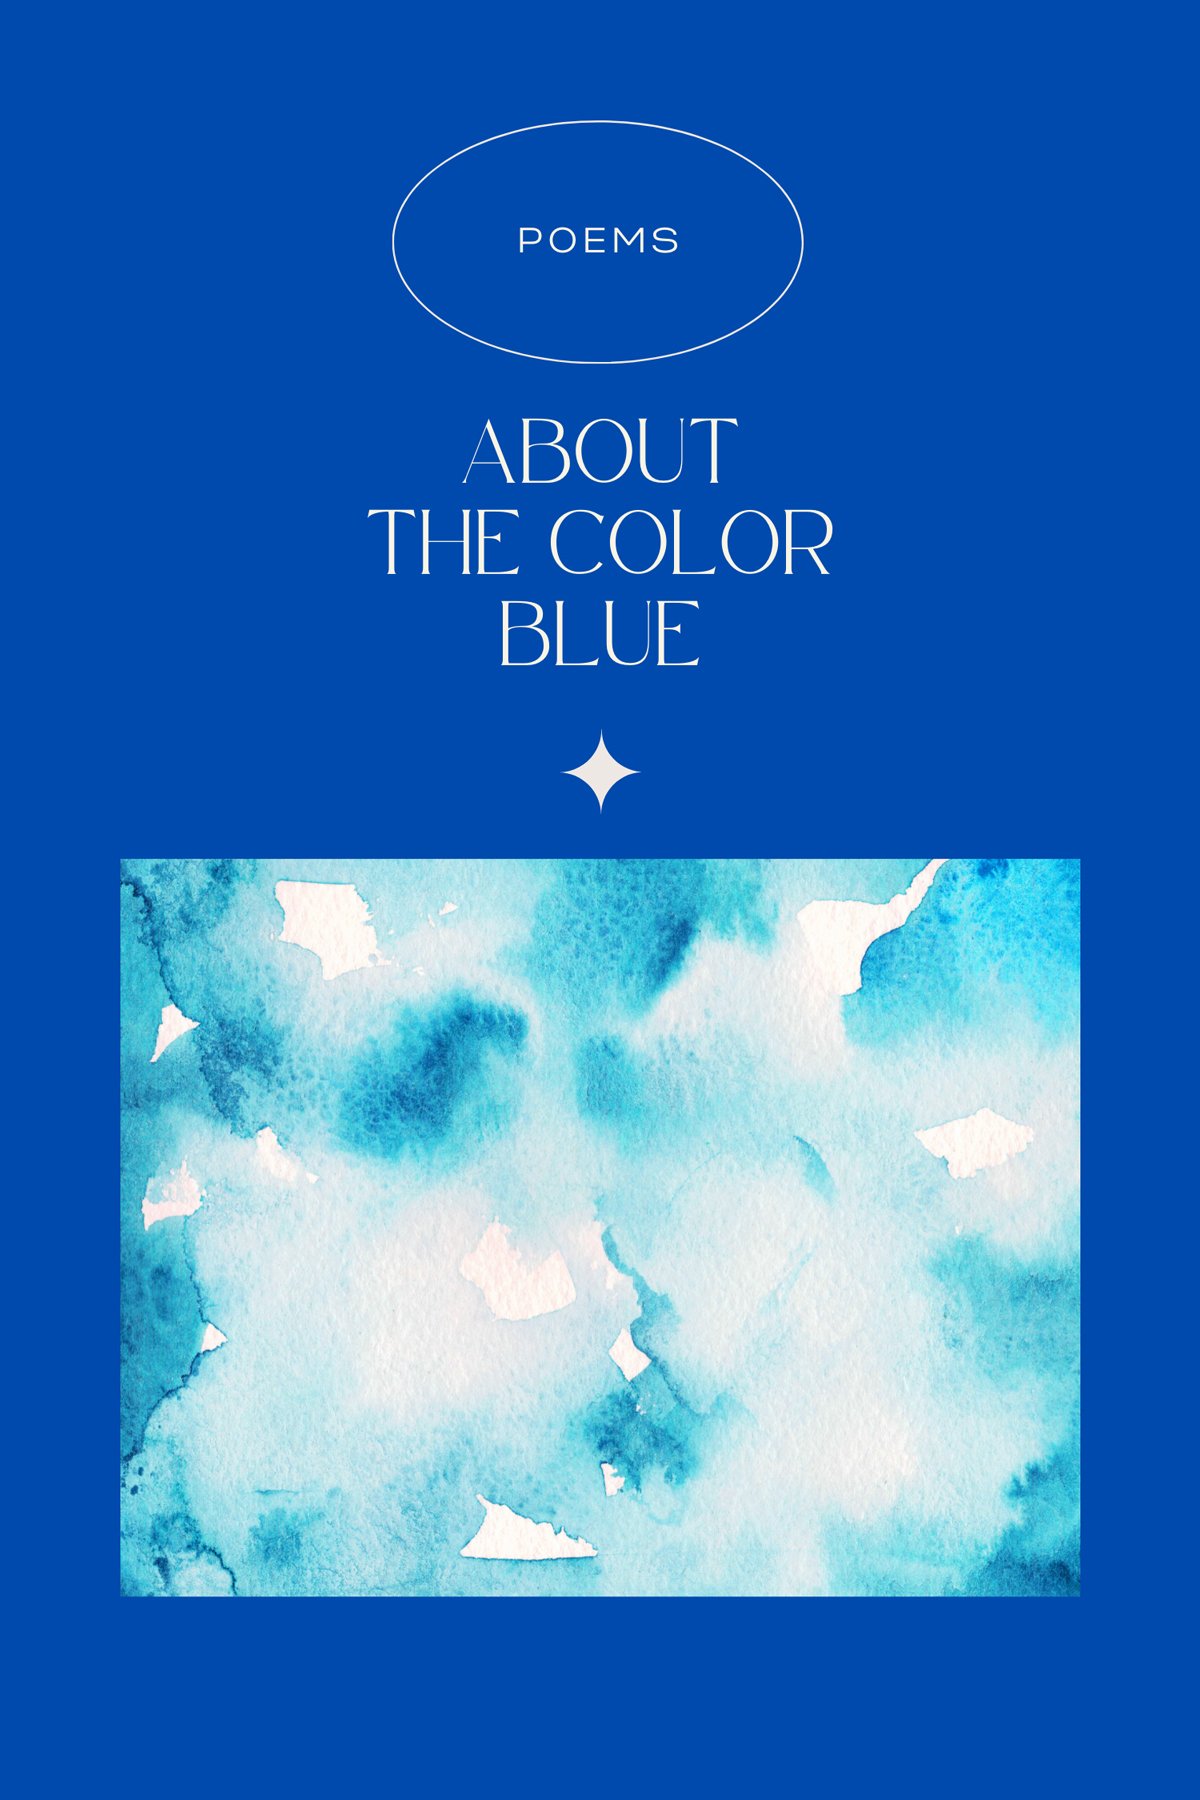 Poems about the color blue